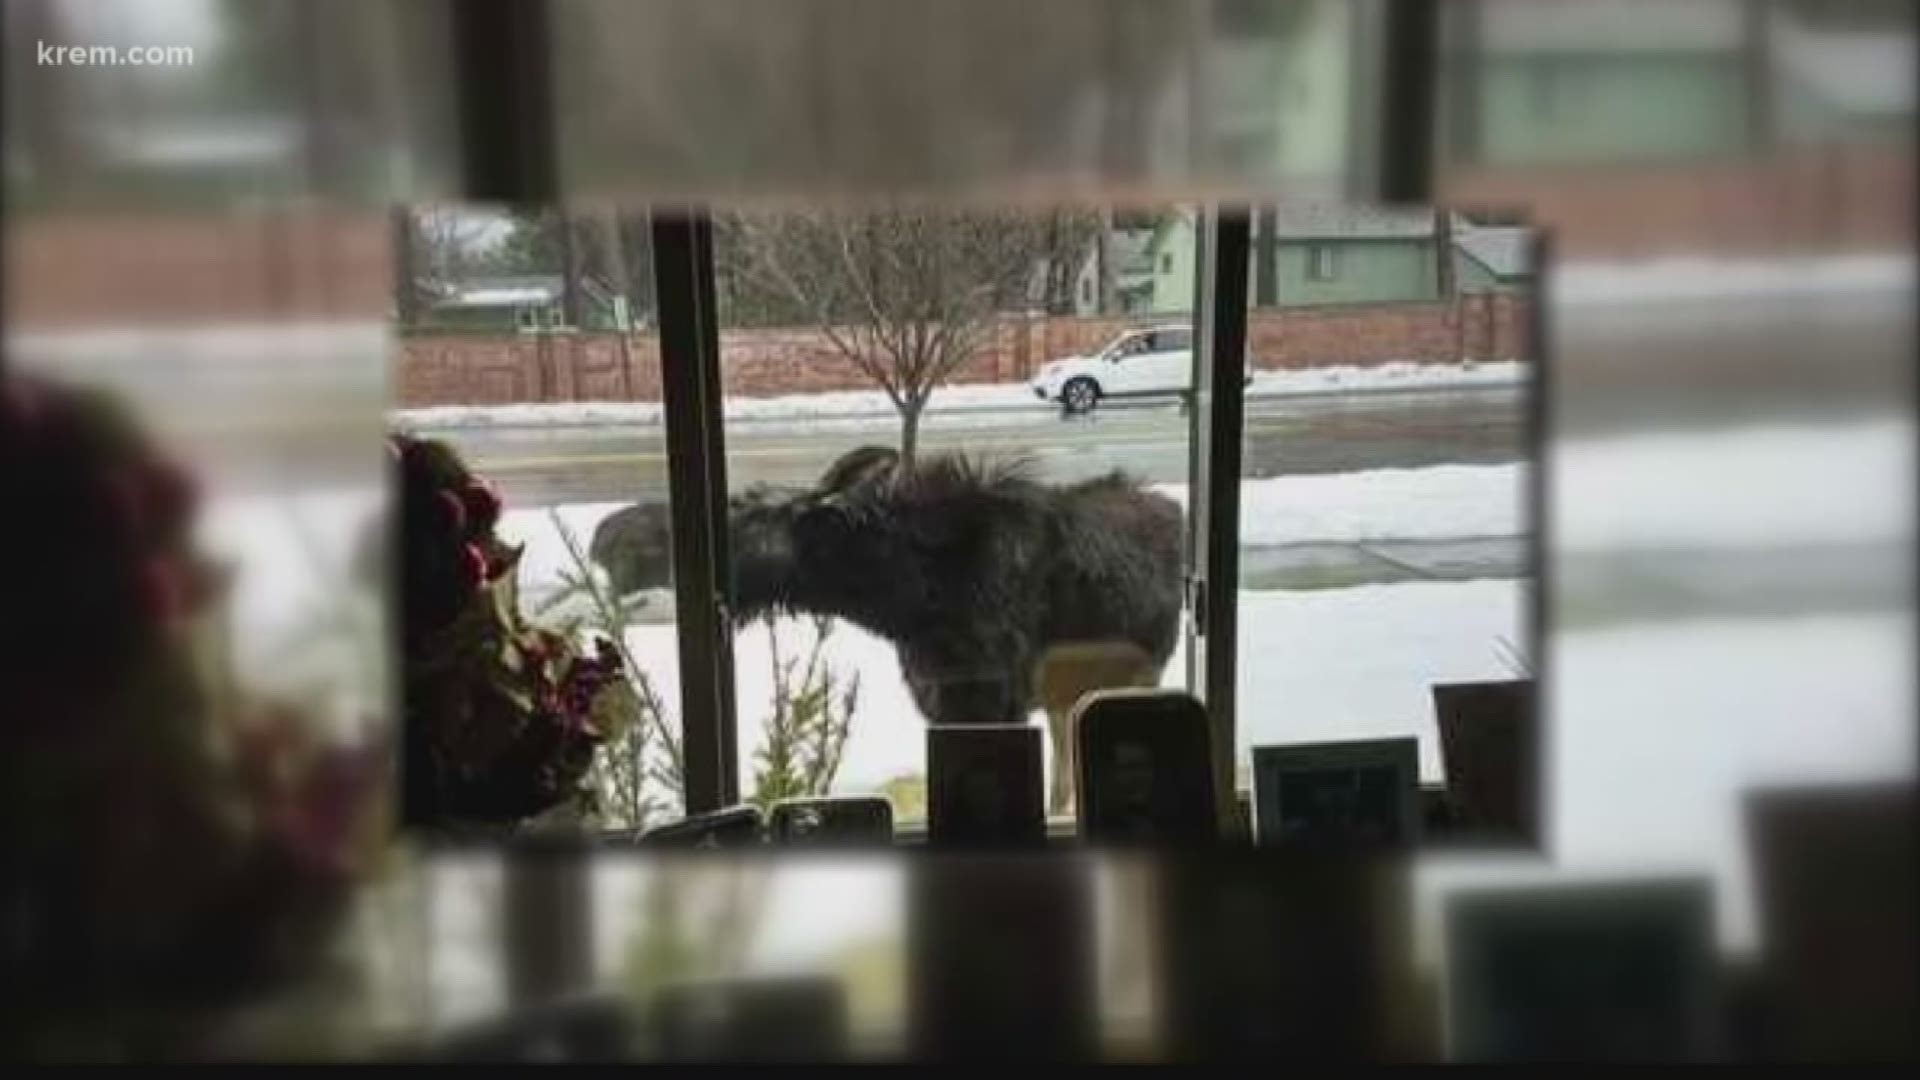 Paul Creighton sees majestic moose visiting his neighborhood. They are pretty to look at, as long as you give them space.